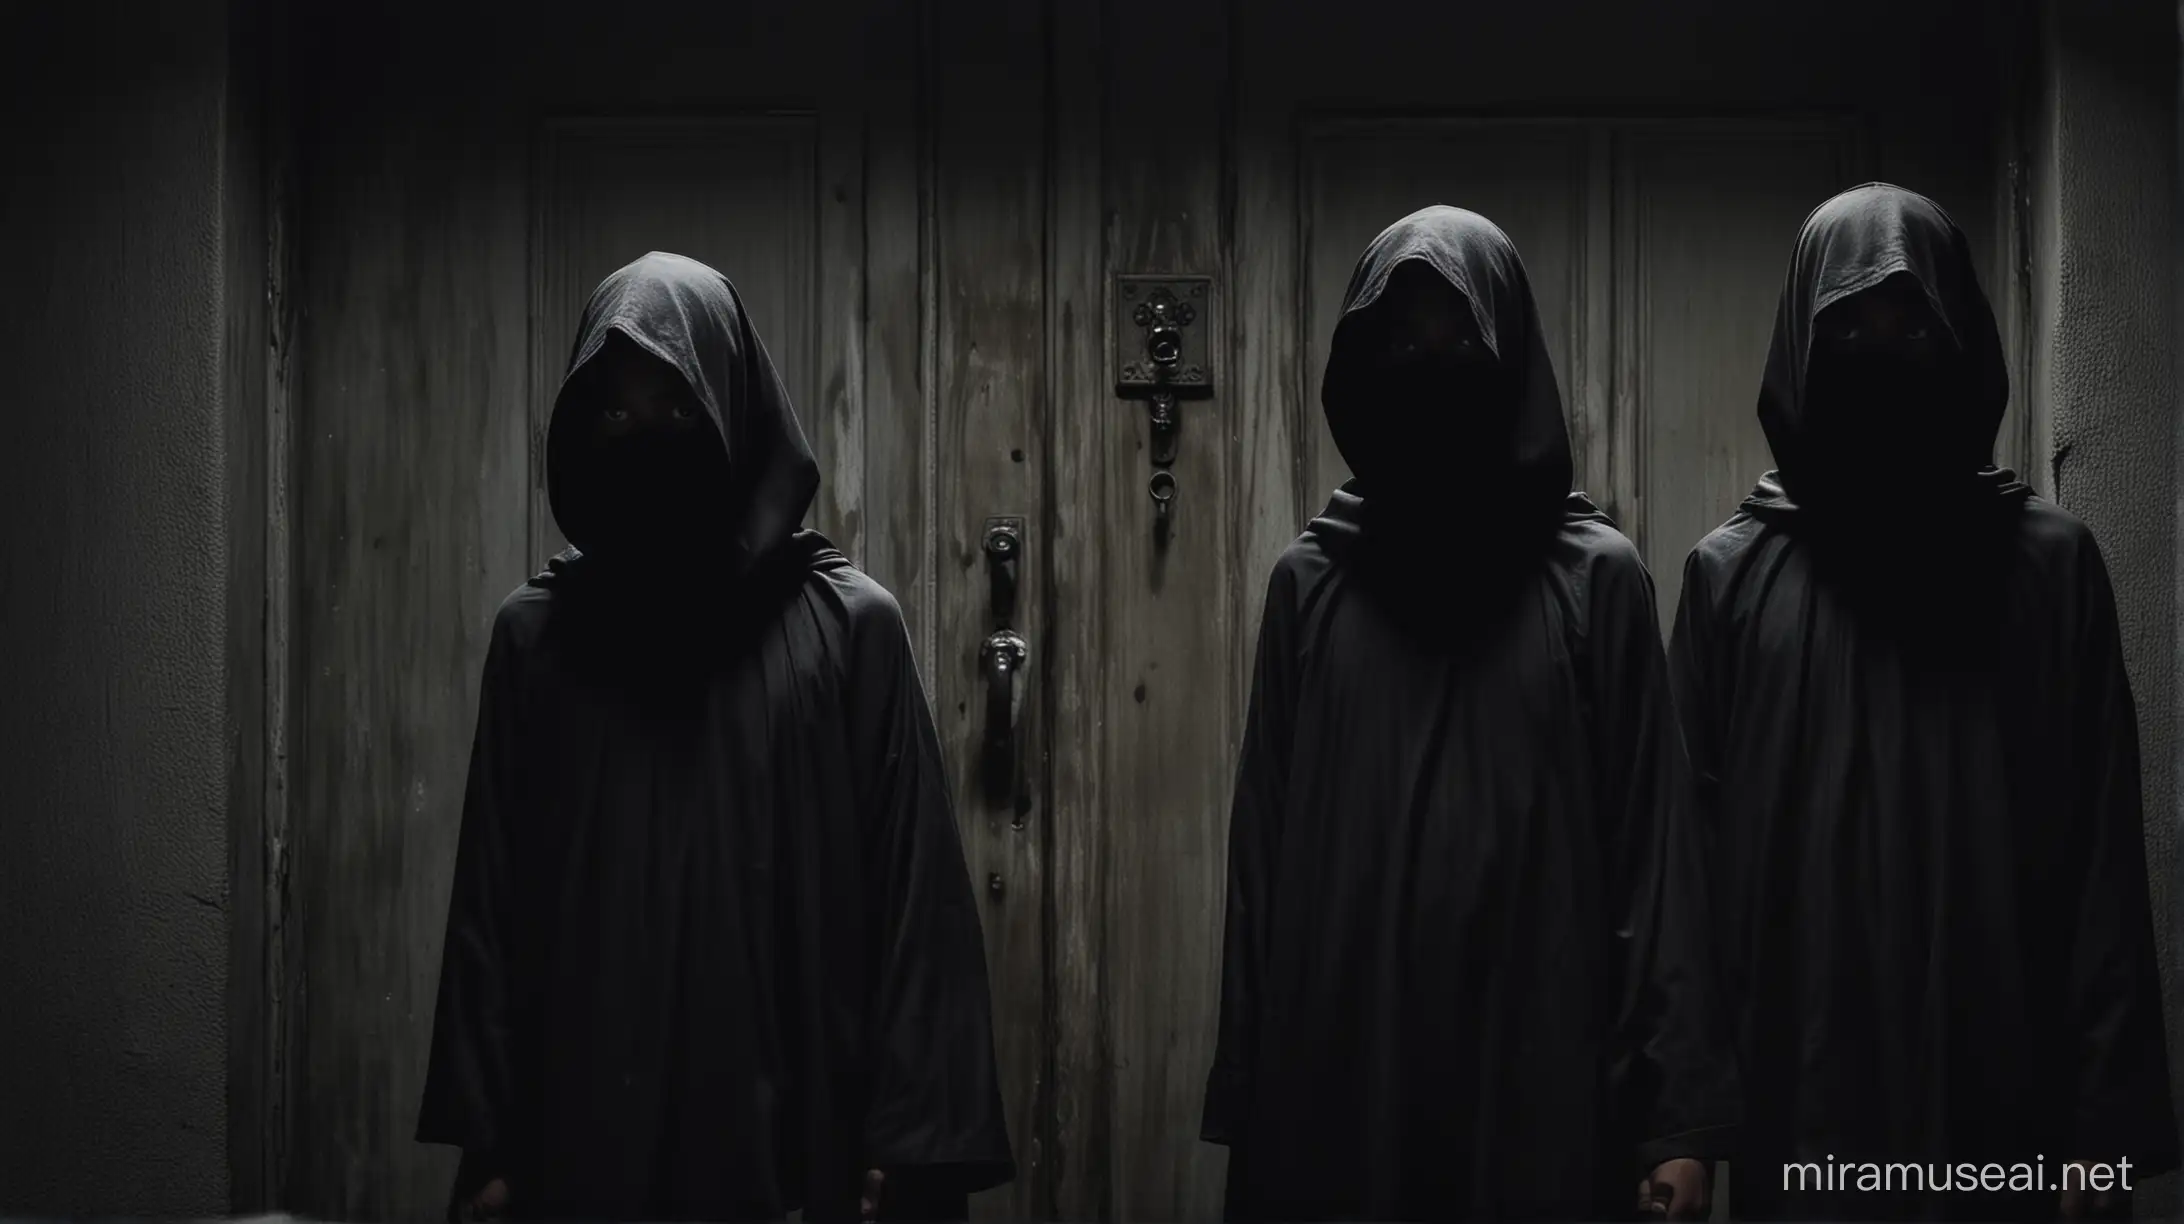 Three robed figures wearing black hoods knocking on the doors of houses in the Philippines in the middle of the night, two of them looked like old Filipino men while the other one looks is a young Filipino girl, their faces are obscured, mysterious, dark, cinematic, horror